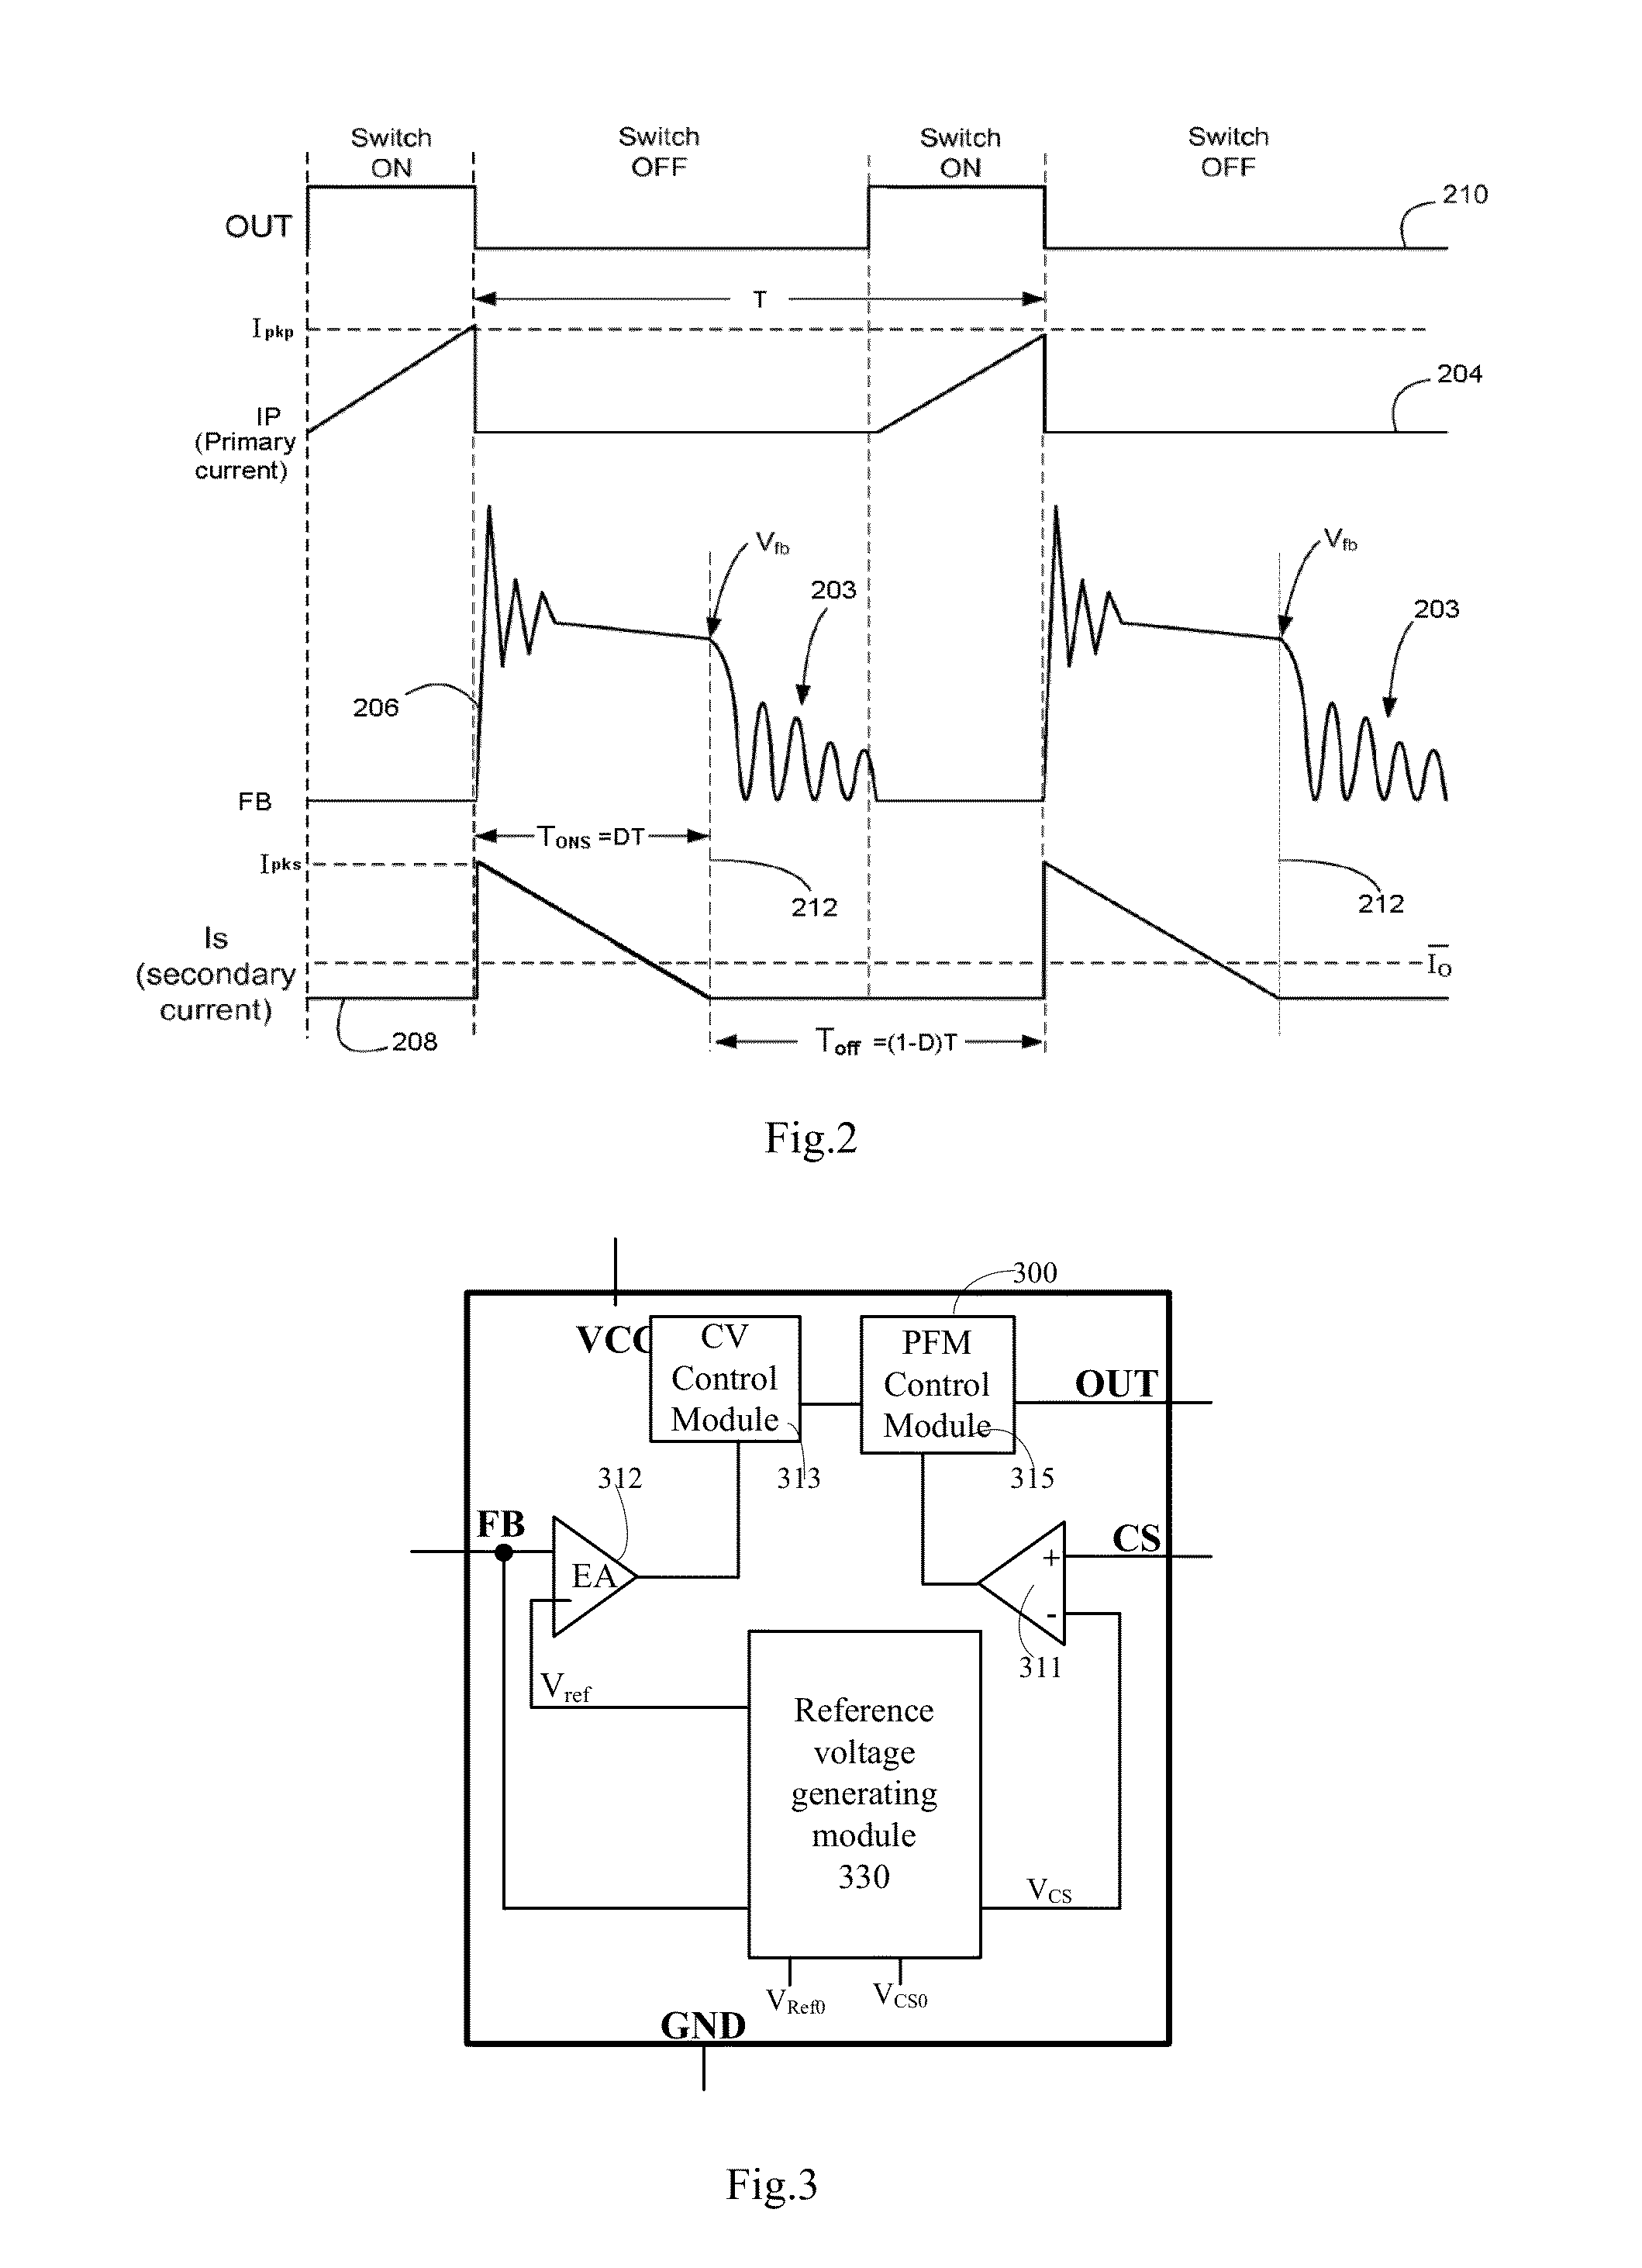 Primary-side regulated modulation controller with improved transient response and audile noise